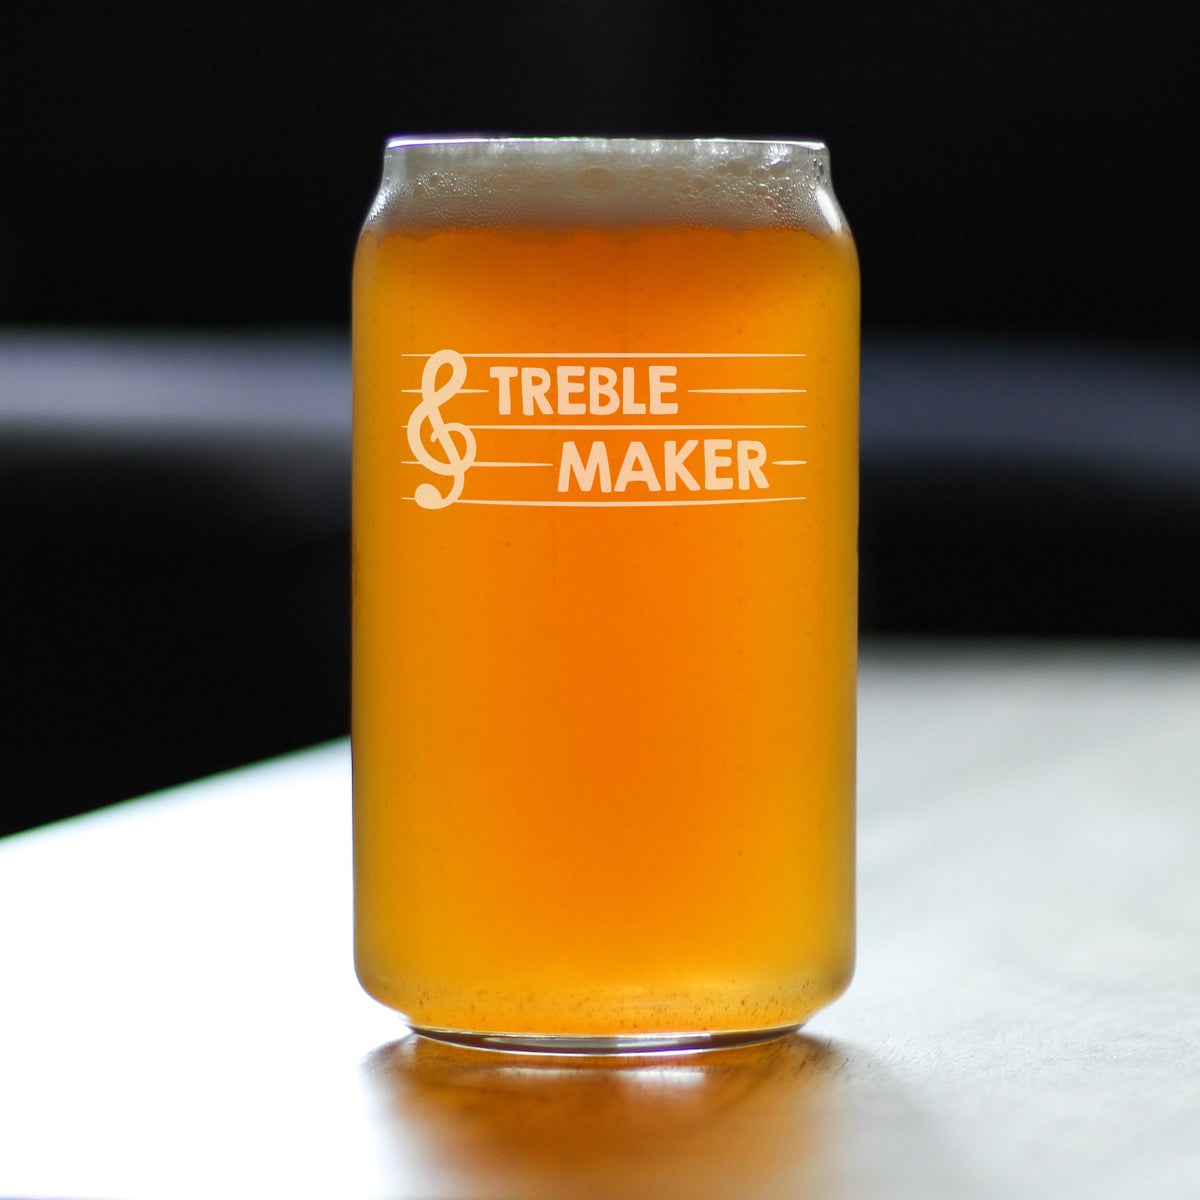 Treble Maker - Beer Can Pint Glass - Cute Funny Music Teacher Gifts for Women and Men - Fun Unique Musical Decor